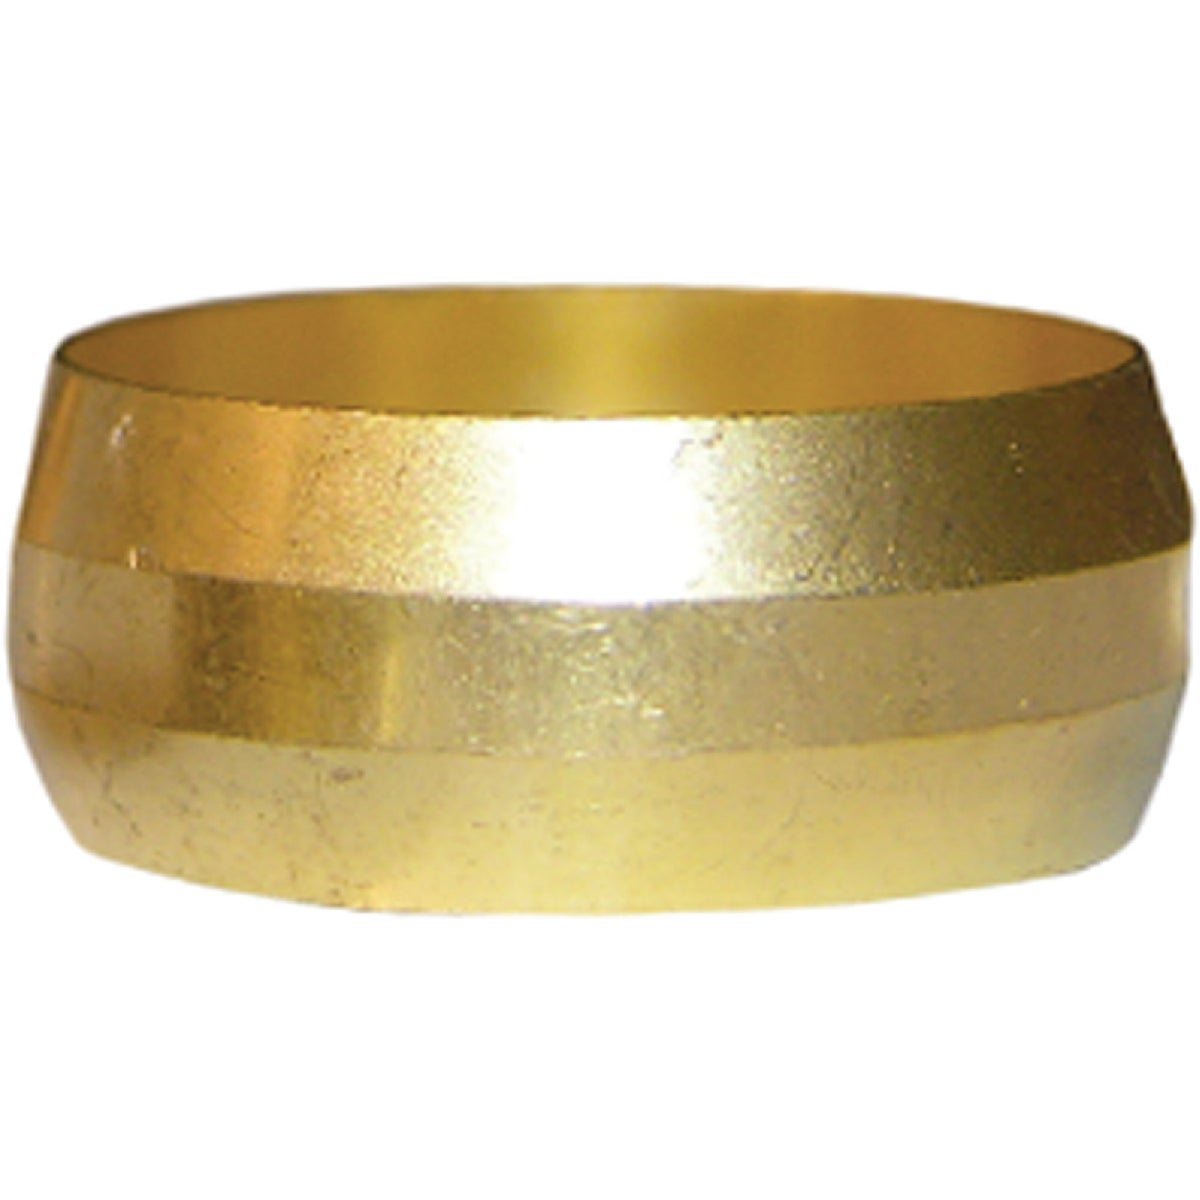 Lasco 7/8 In. Brass Compression Sleeve (2-Pack)